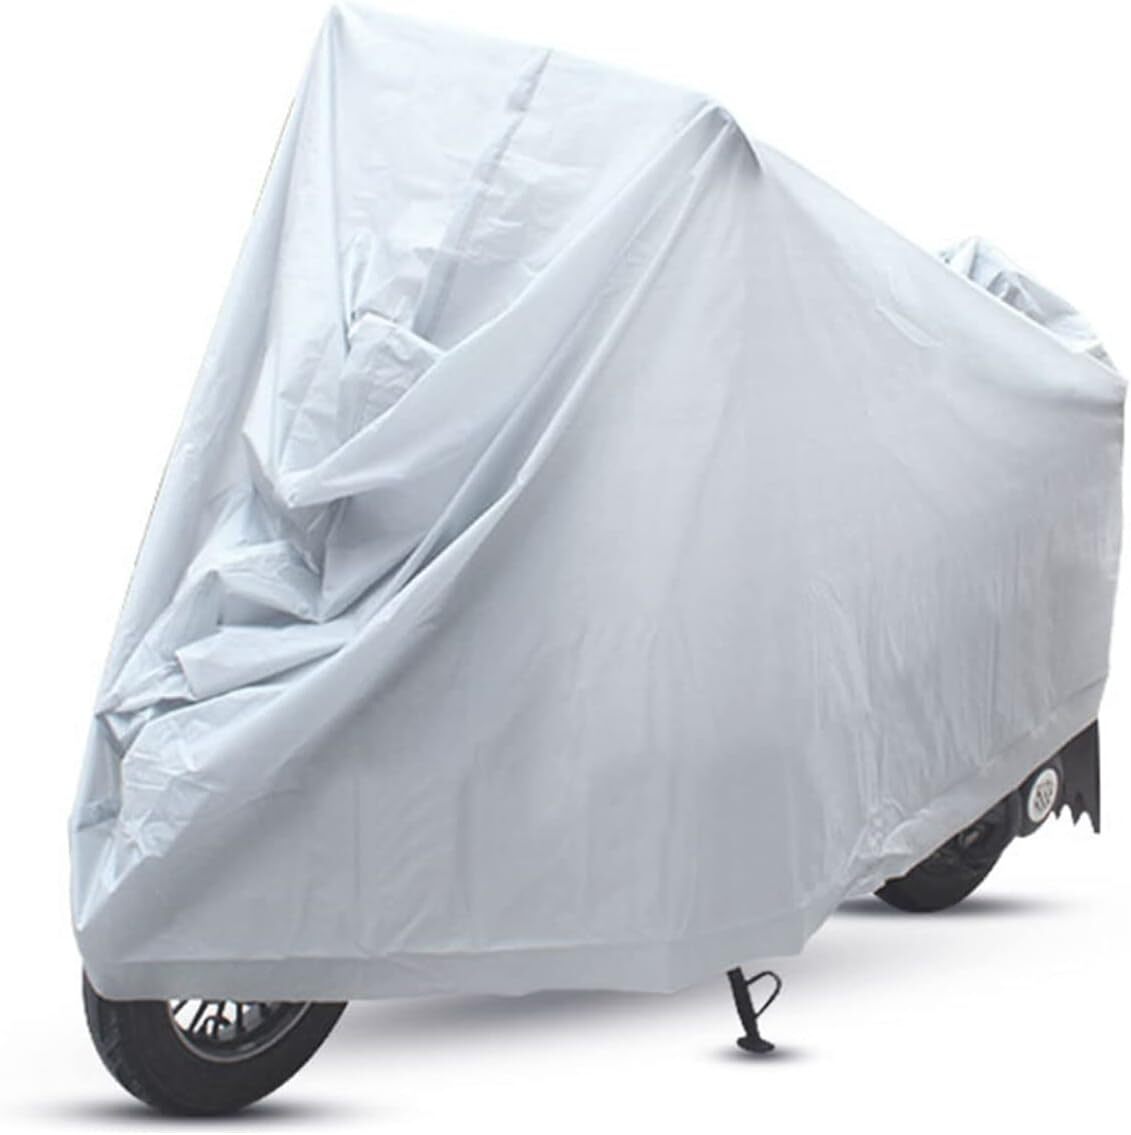 Protective Waterproof Motorcycle Cover All Weather Motorbike Protection Bike Shield 